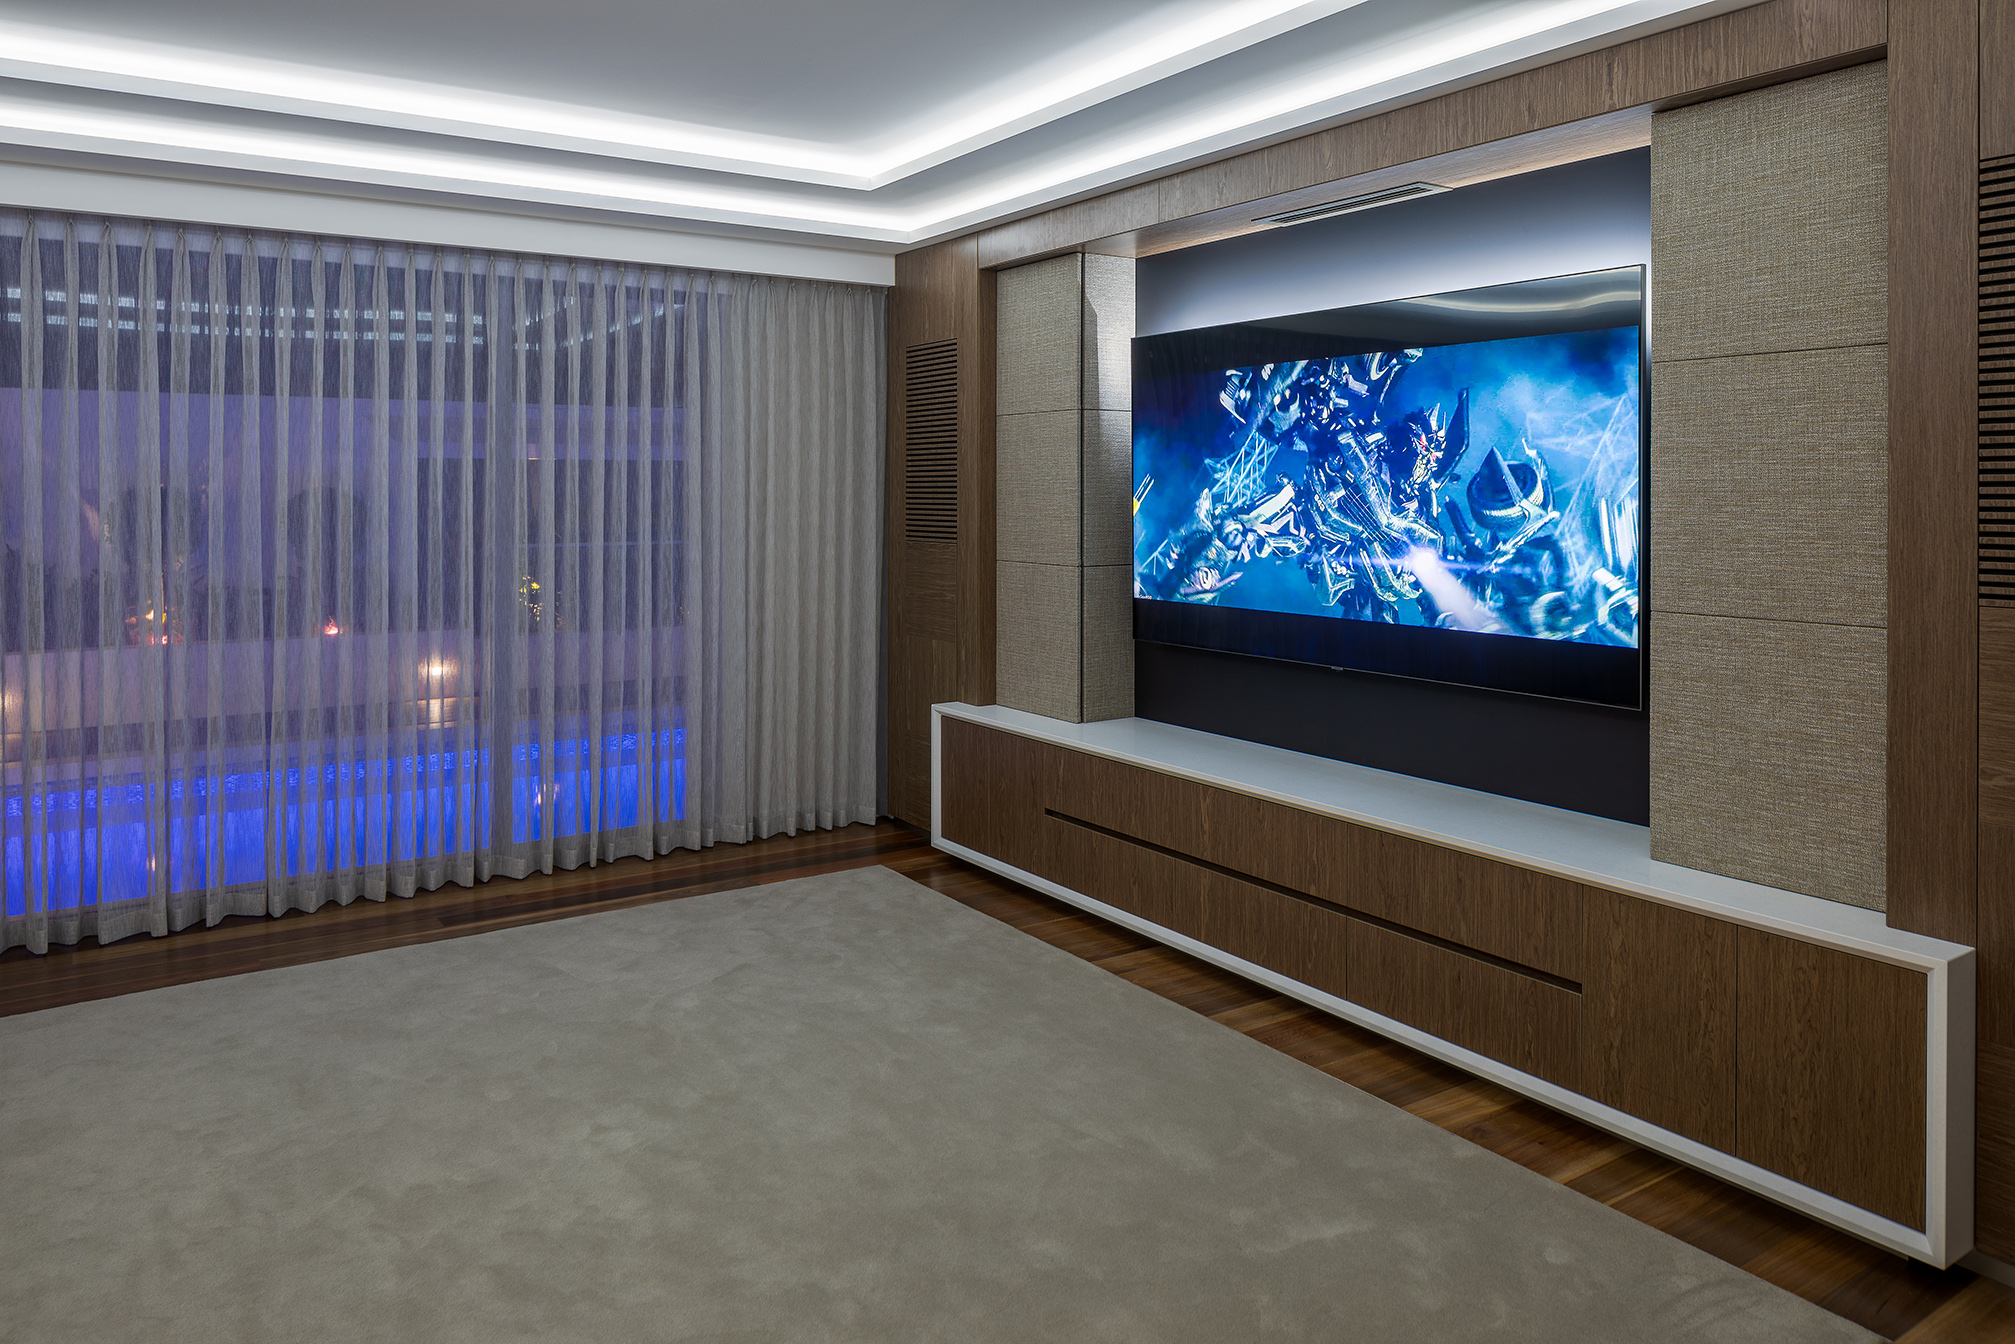 Home theatre system with wooden panels and large screen tv